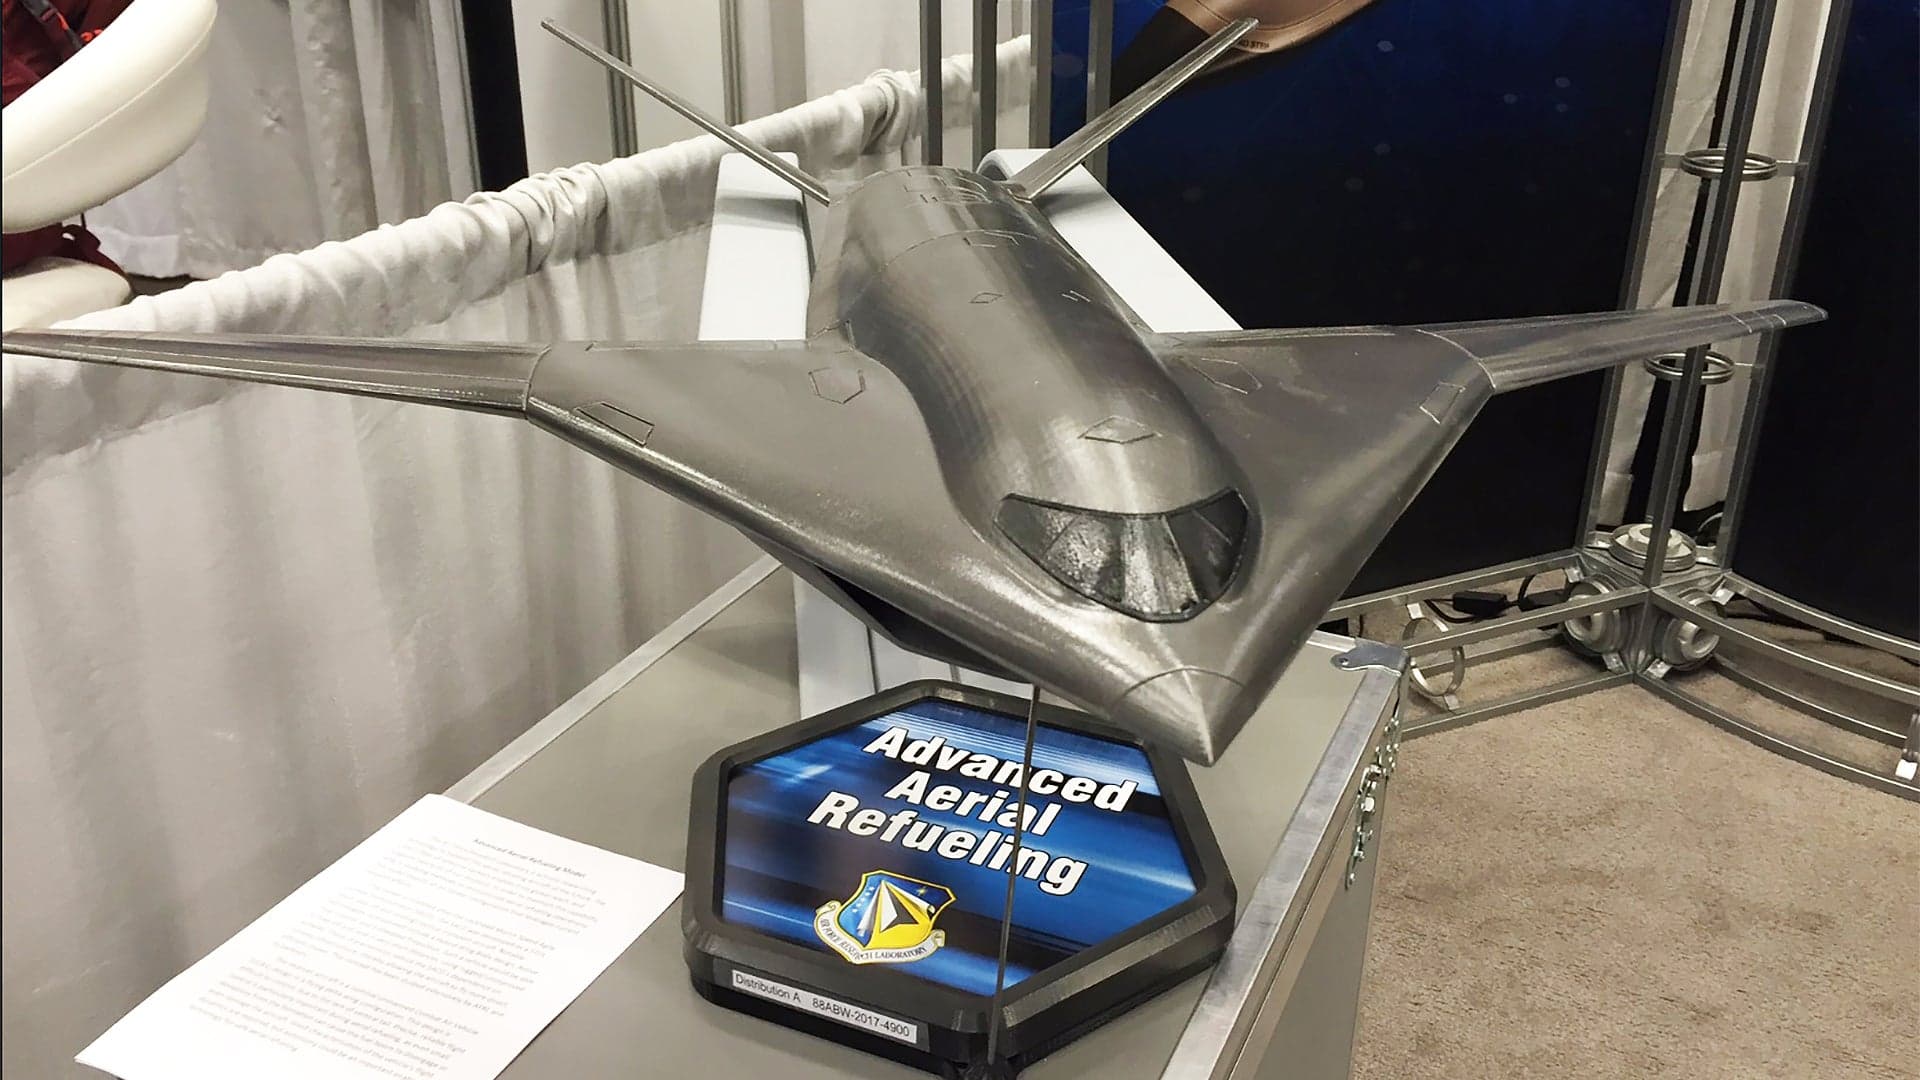 New Stealth Tanker Model Is Touted By Air Force Research Lab At Aviation Conference